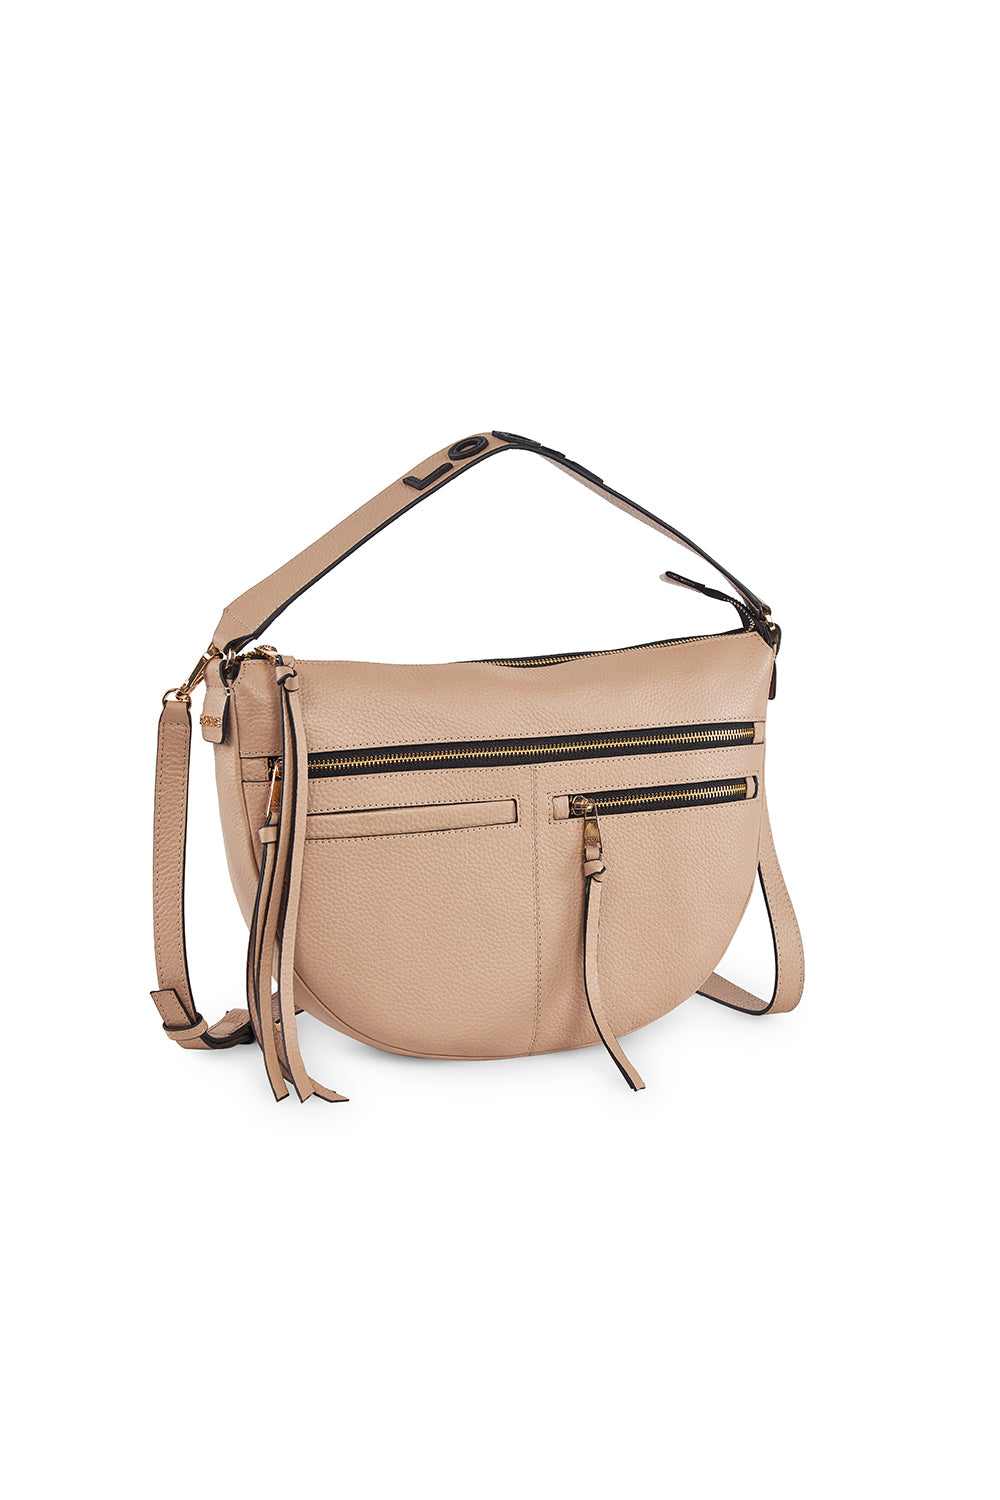 Buy now The Soft Pebble Leather Bag and Elevate Your Style with Lodis